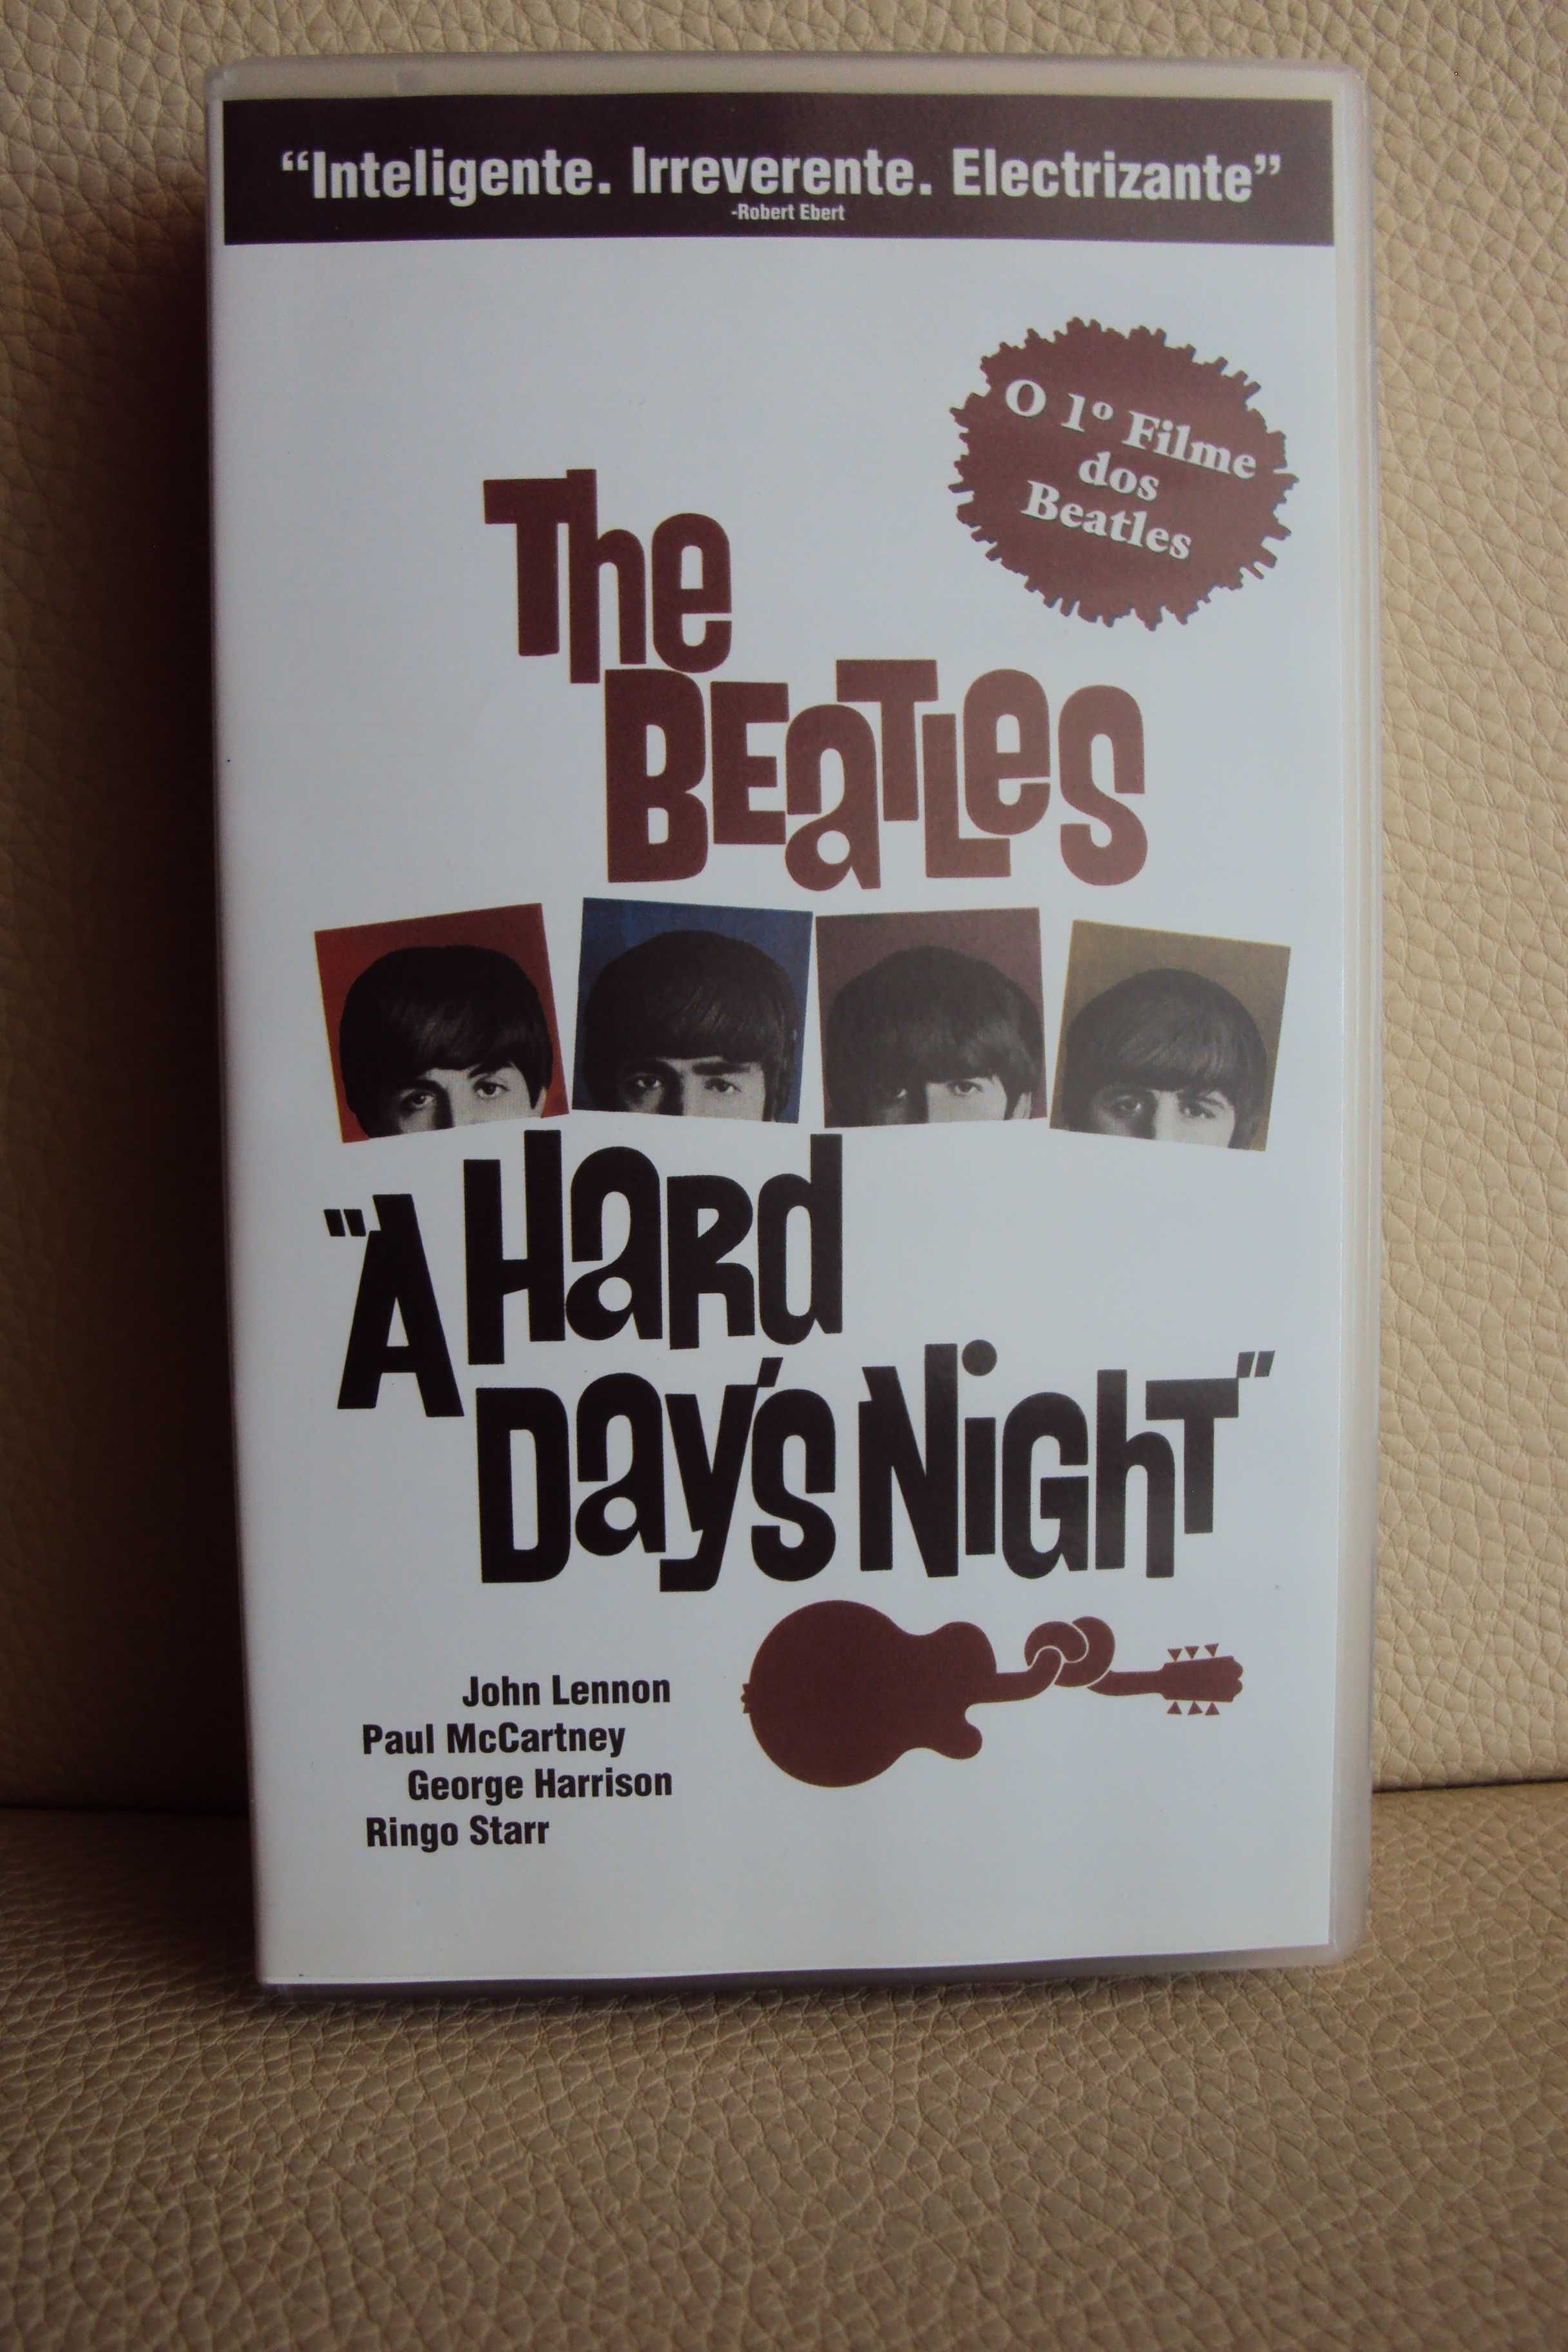 VHS Beatles ' A Hard Day's Night '